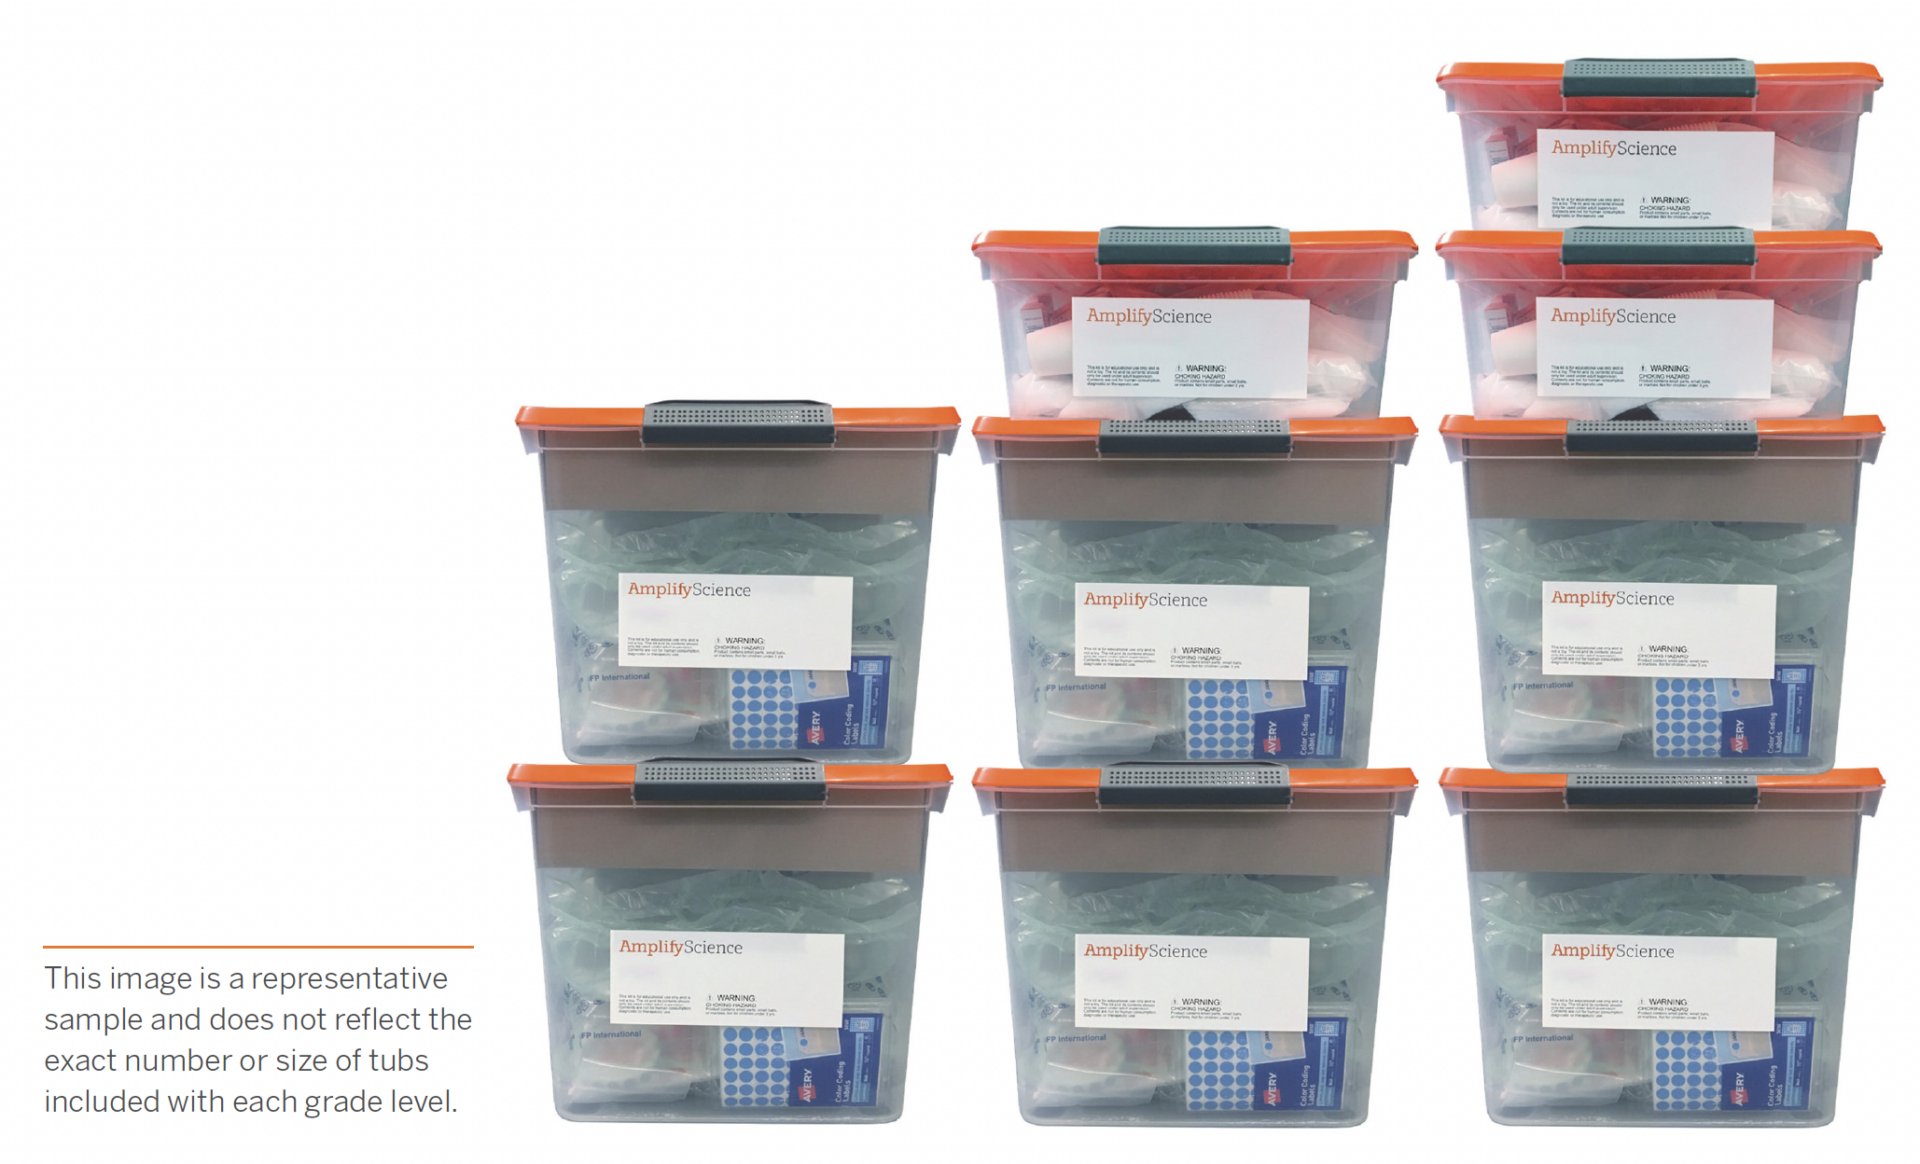 Stacked storage bins with labels, arranged neatly; caption notes they are a sample and may not reflect actual quantities or sizes.